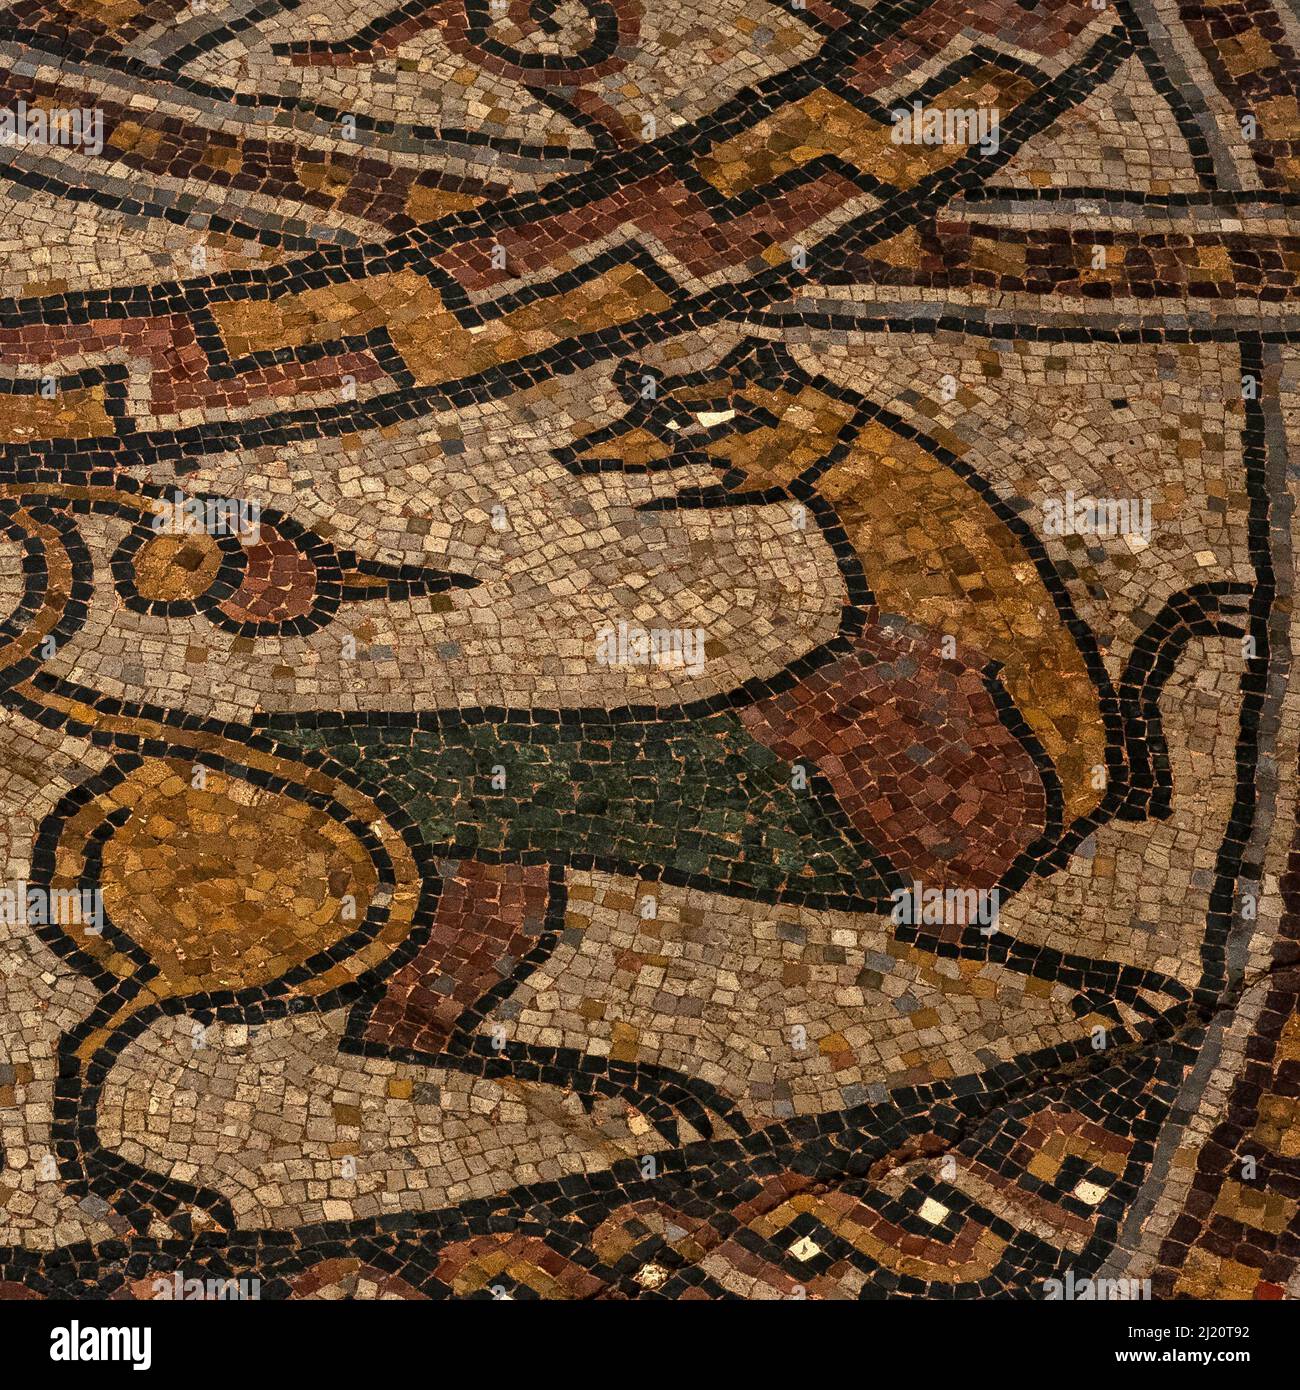 Cat in colour.  Detail of medieval mosaic in restored late-1000s or early 1100s pavement in former Benedictine abbey church at Sorde l'Abbaye, Landes, Nouvelle-Aquitaine, France. Stock Photo